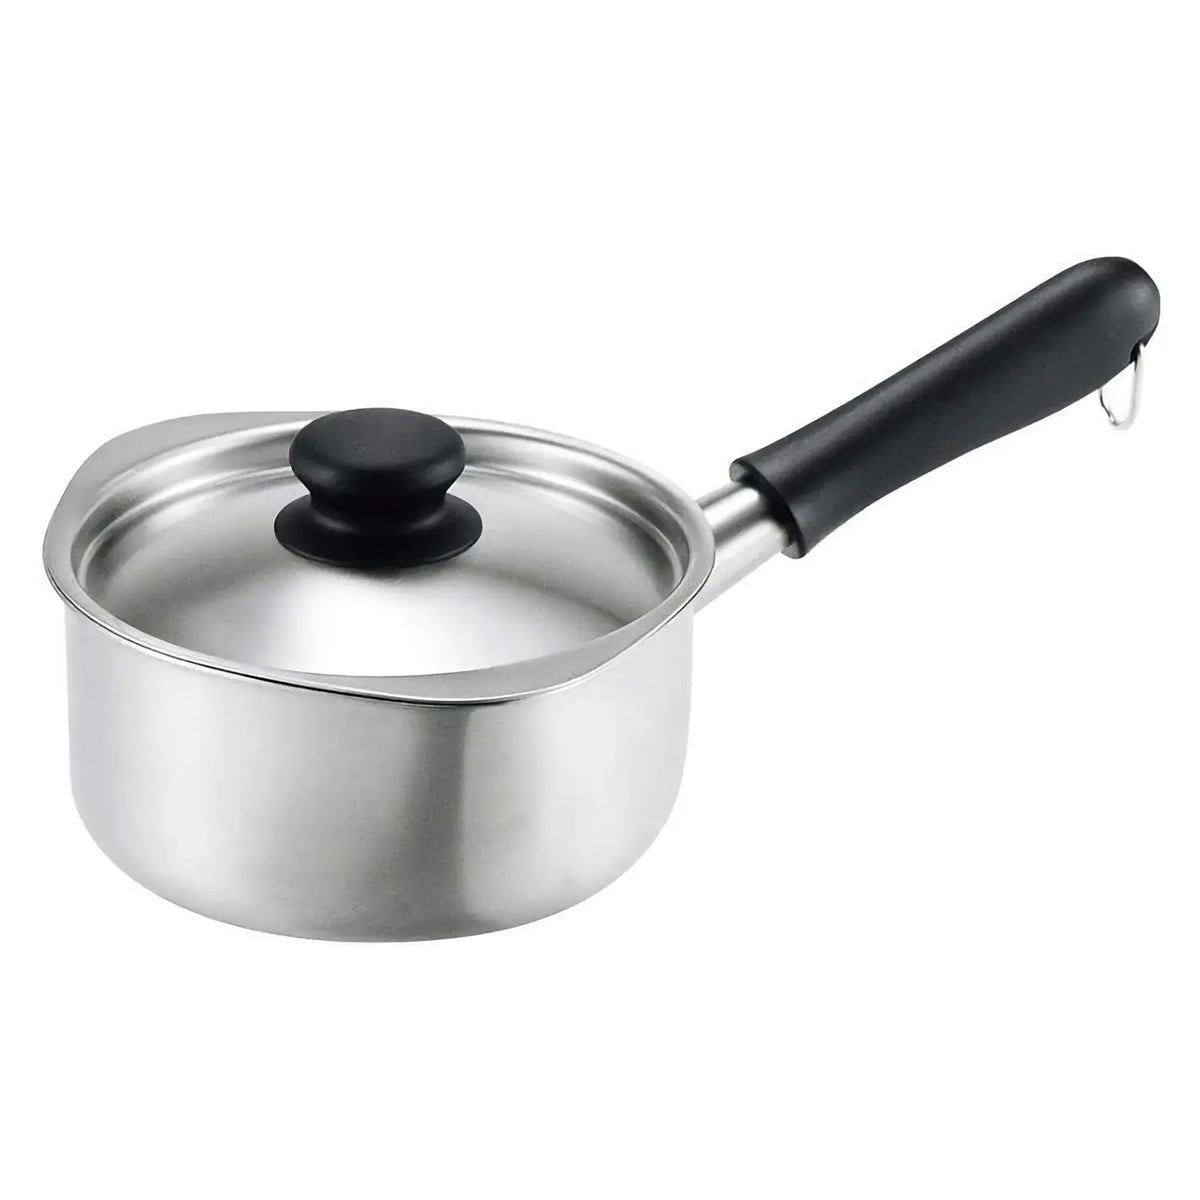  Milk Pot, Small Sauce Pan with Scale Stainless Steel